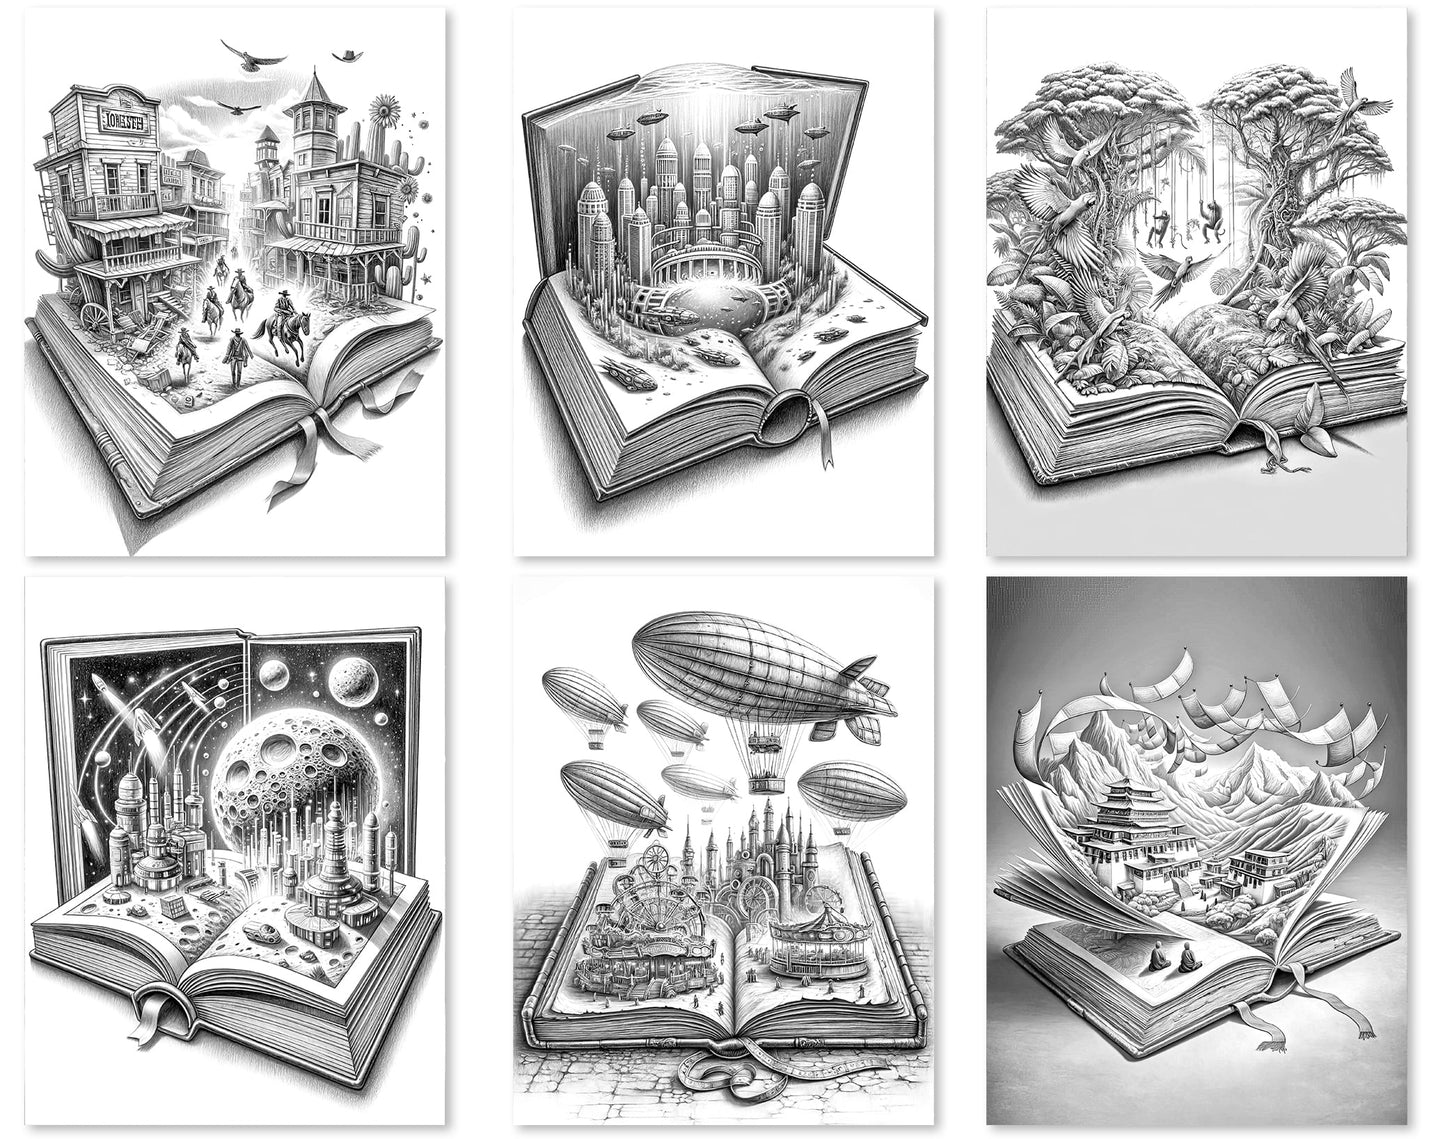 50 Open Magic Book 2 Grayscale Coloring Pages - Instant Download - Printable Dark/Light